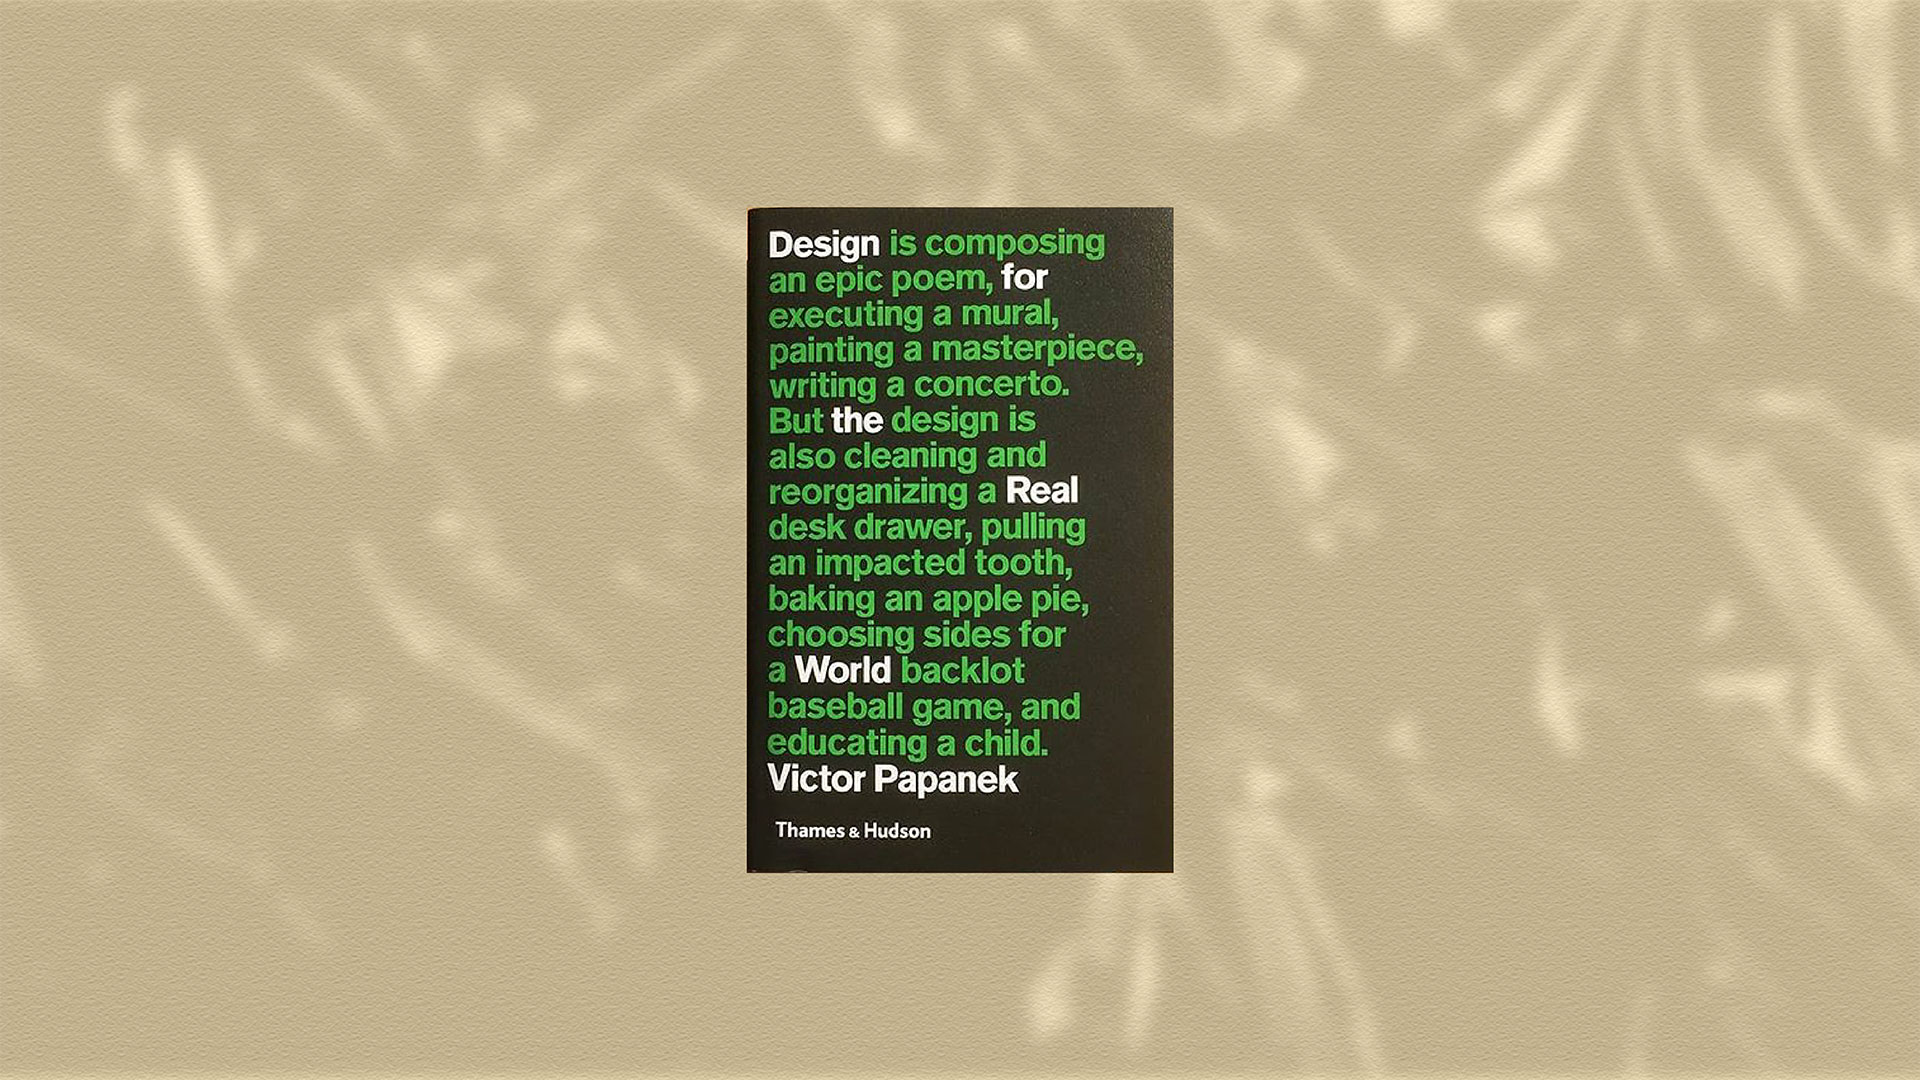 Product design books - Design for the Real World